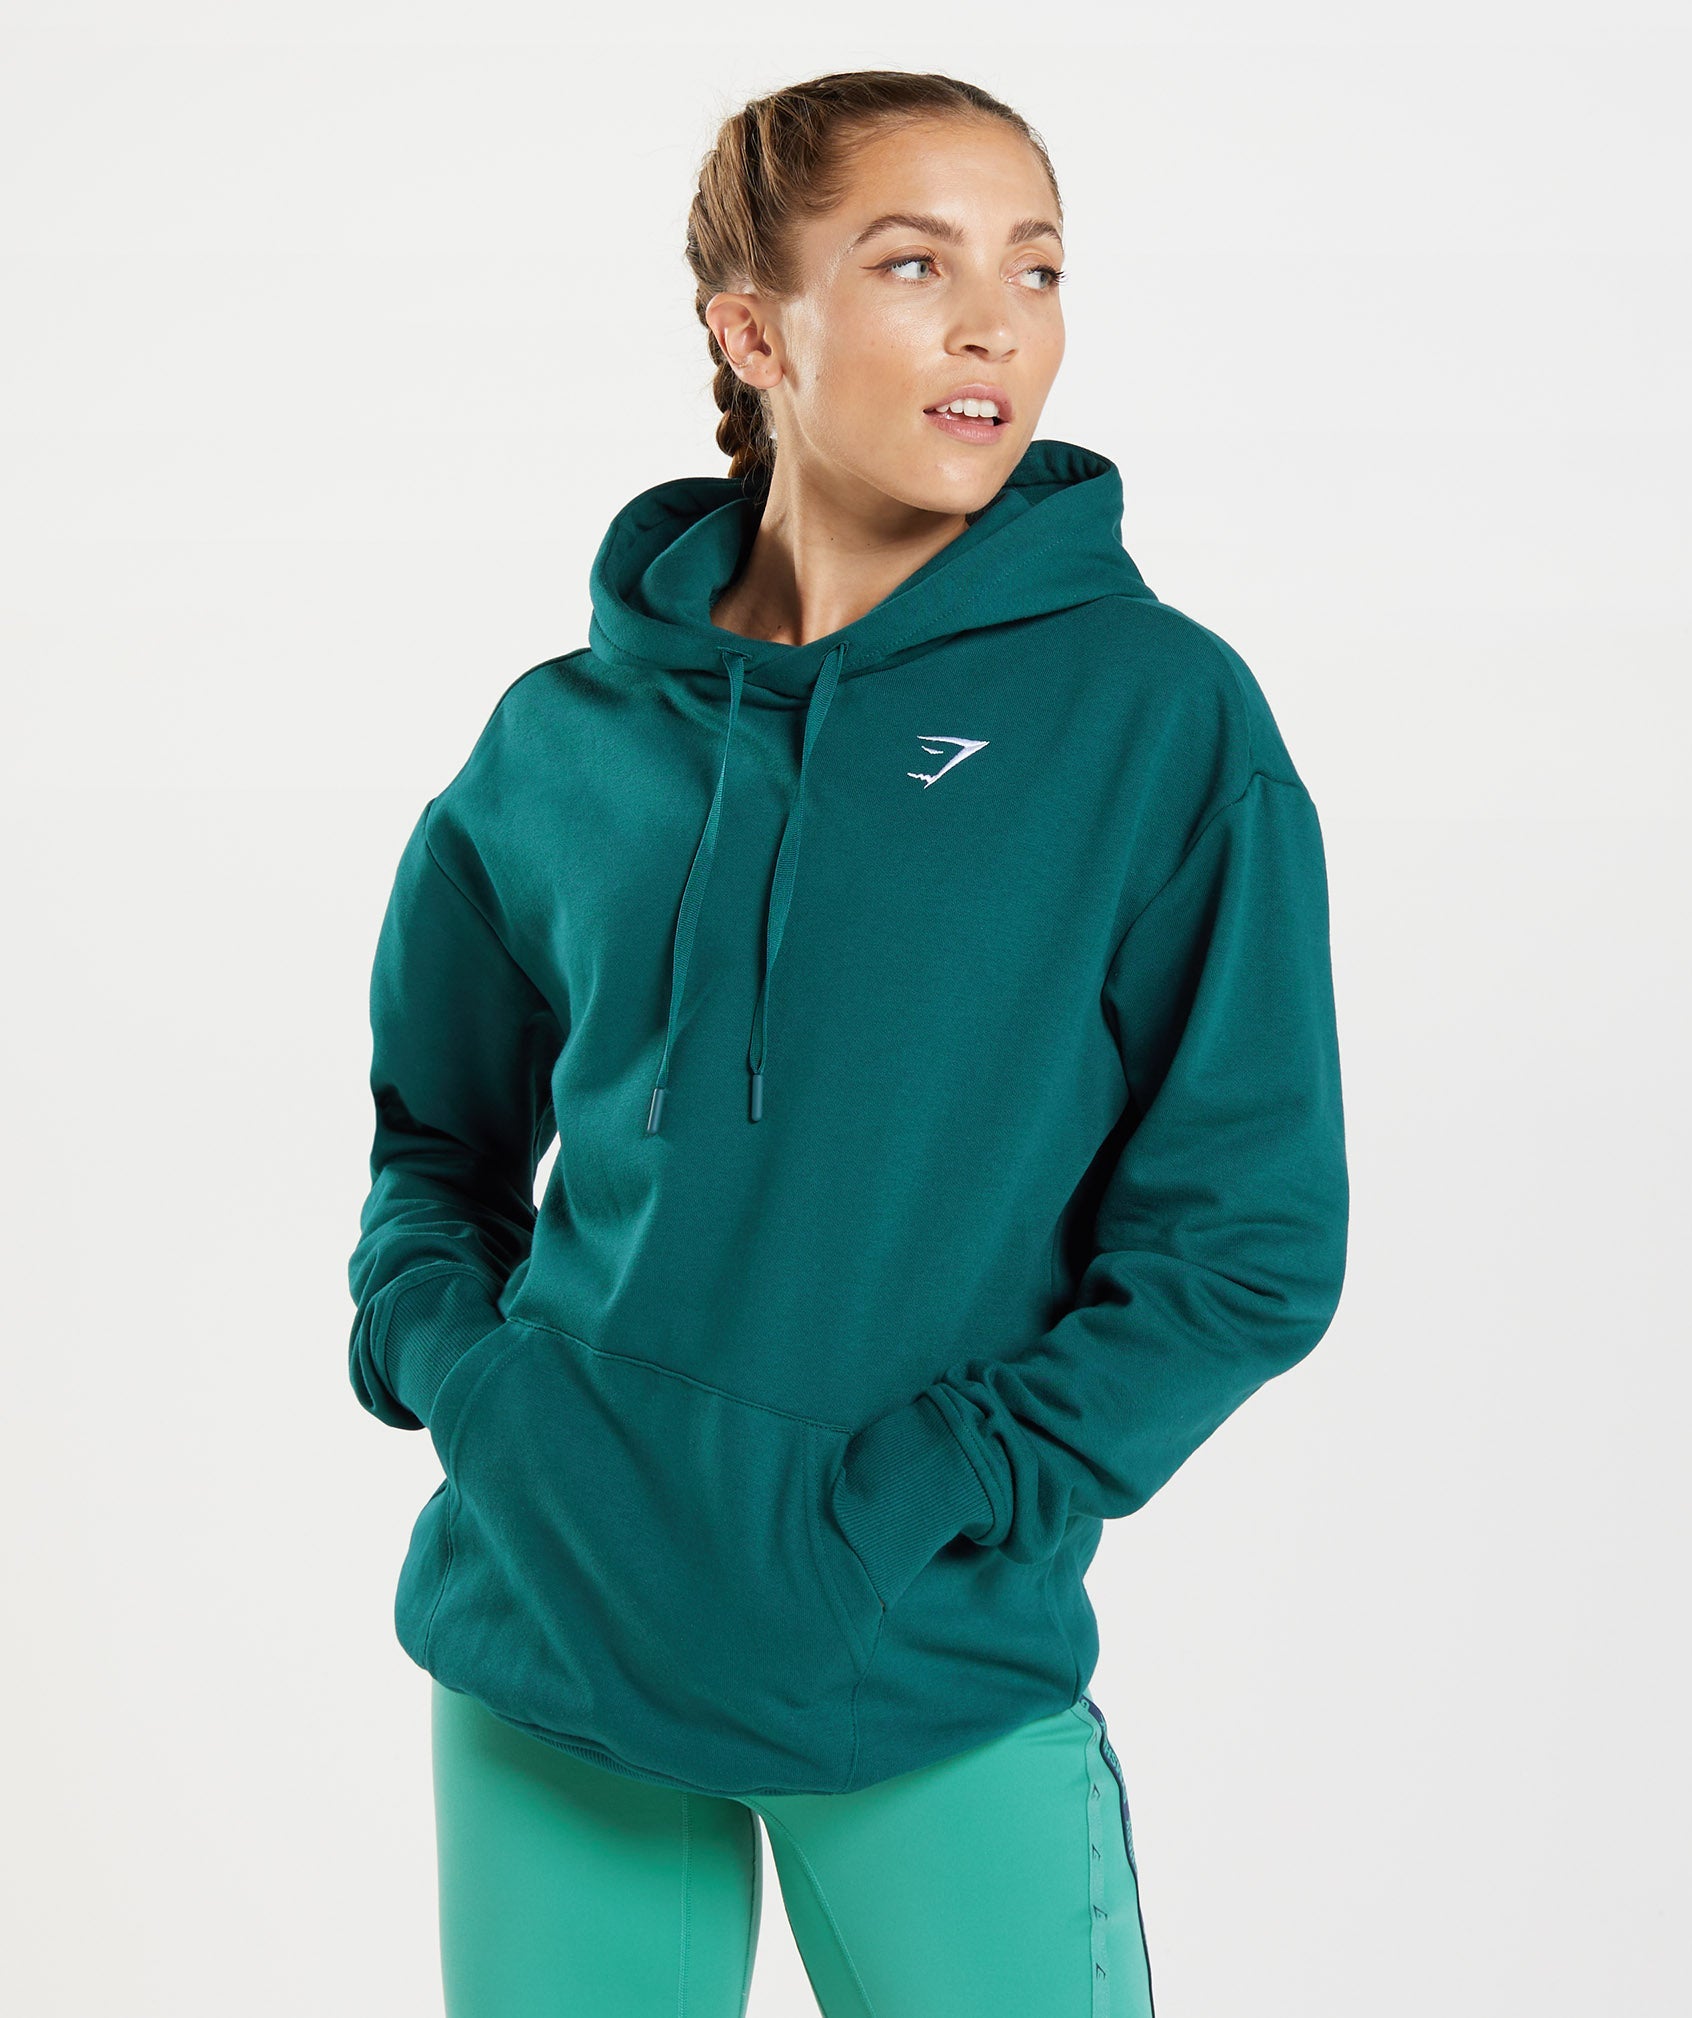 Training Oversized Hoodie in Winter Teal - view 1